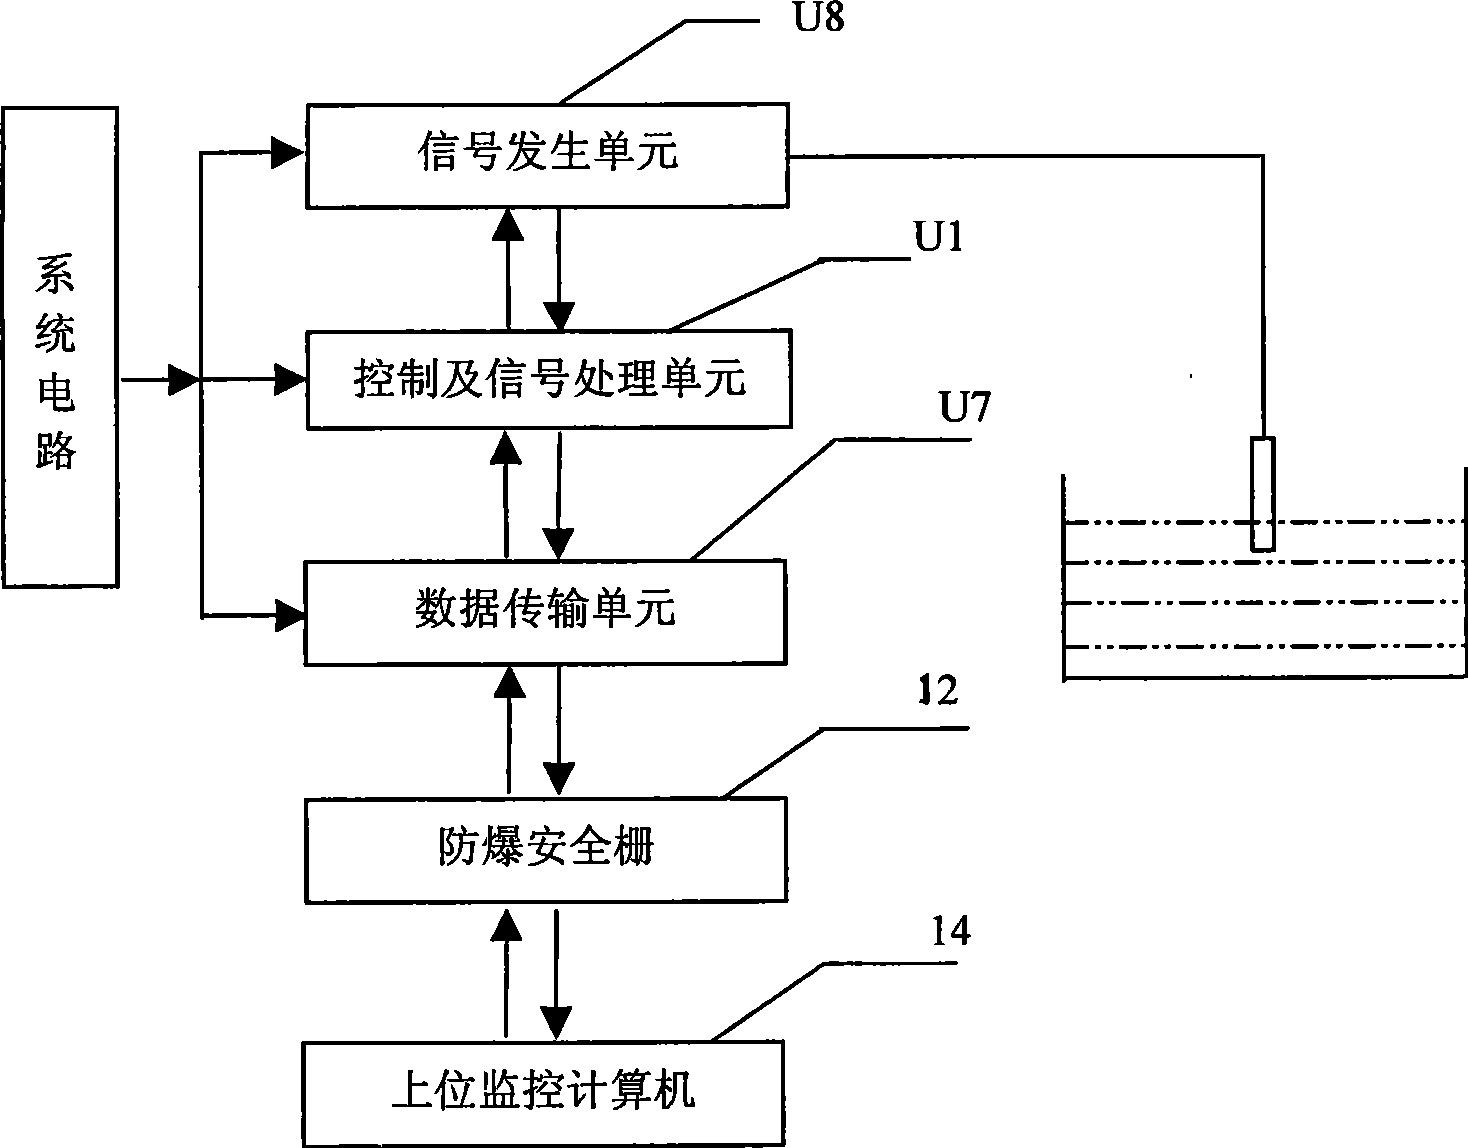 Monitoring method for baseboard leakage of oil product storage tank